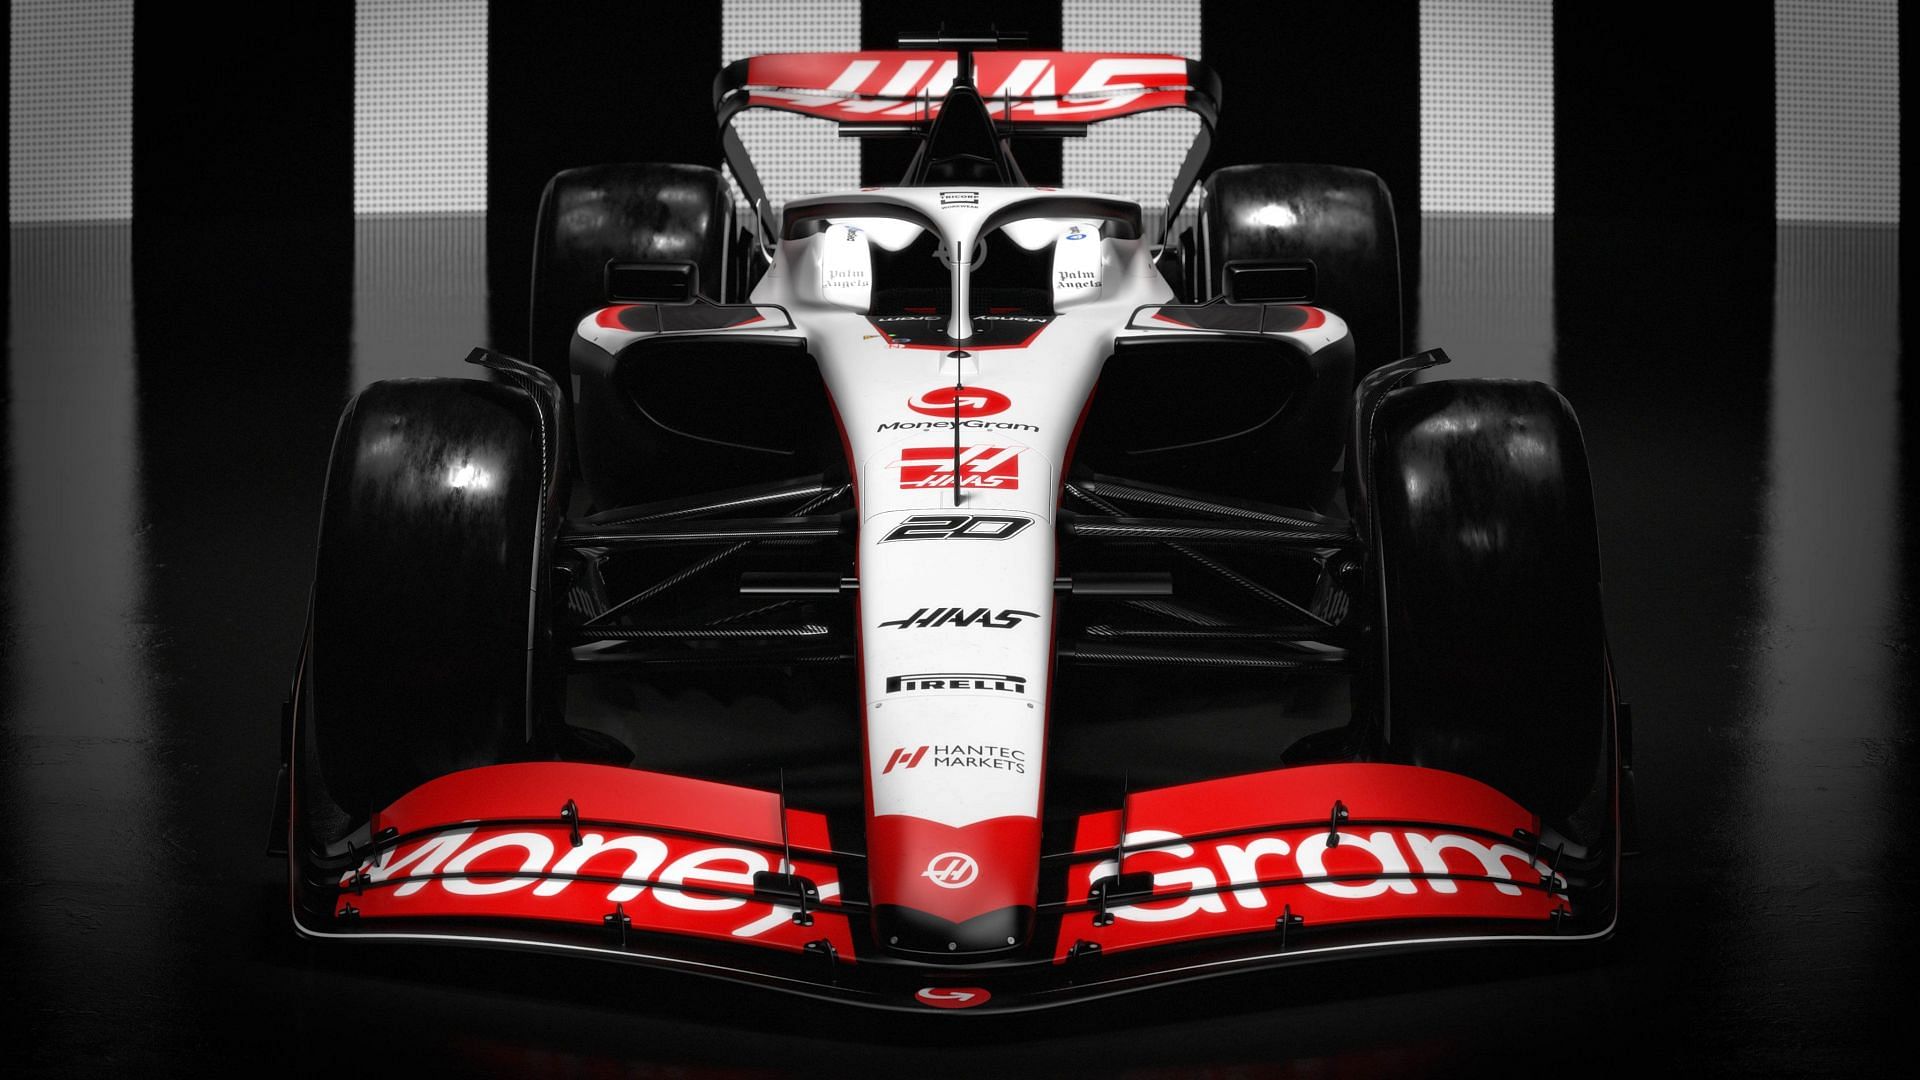 Haas became the first team to launch its livery this season